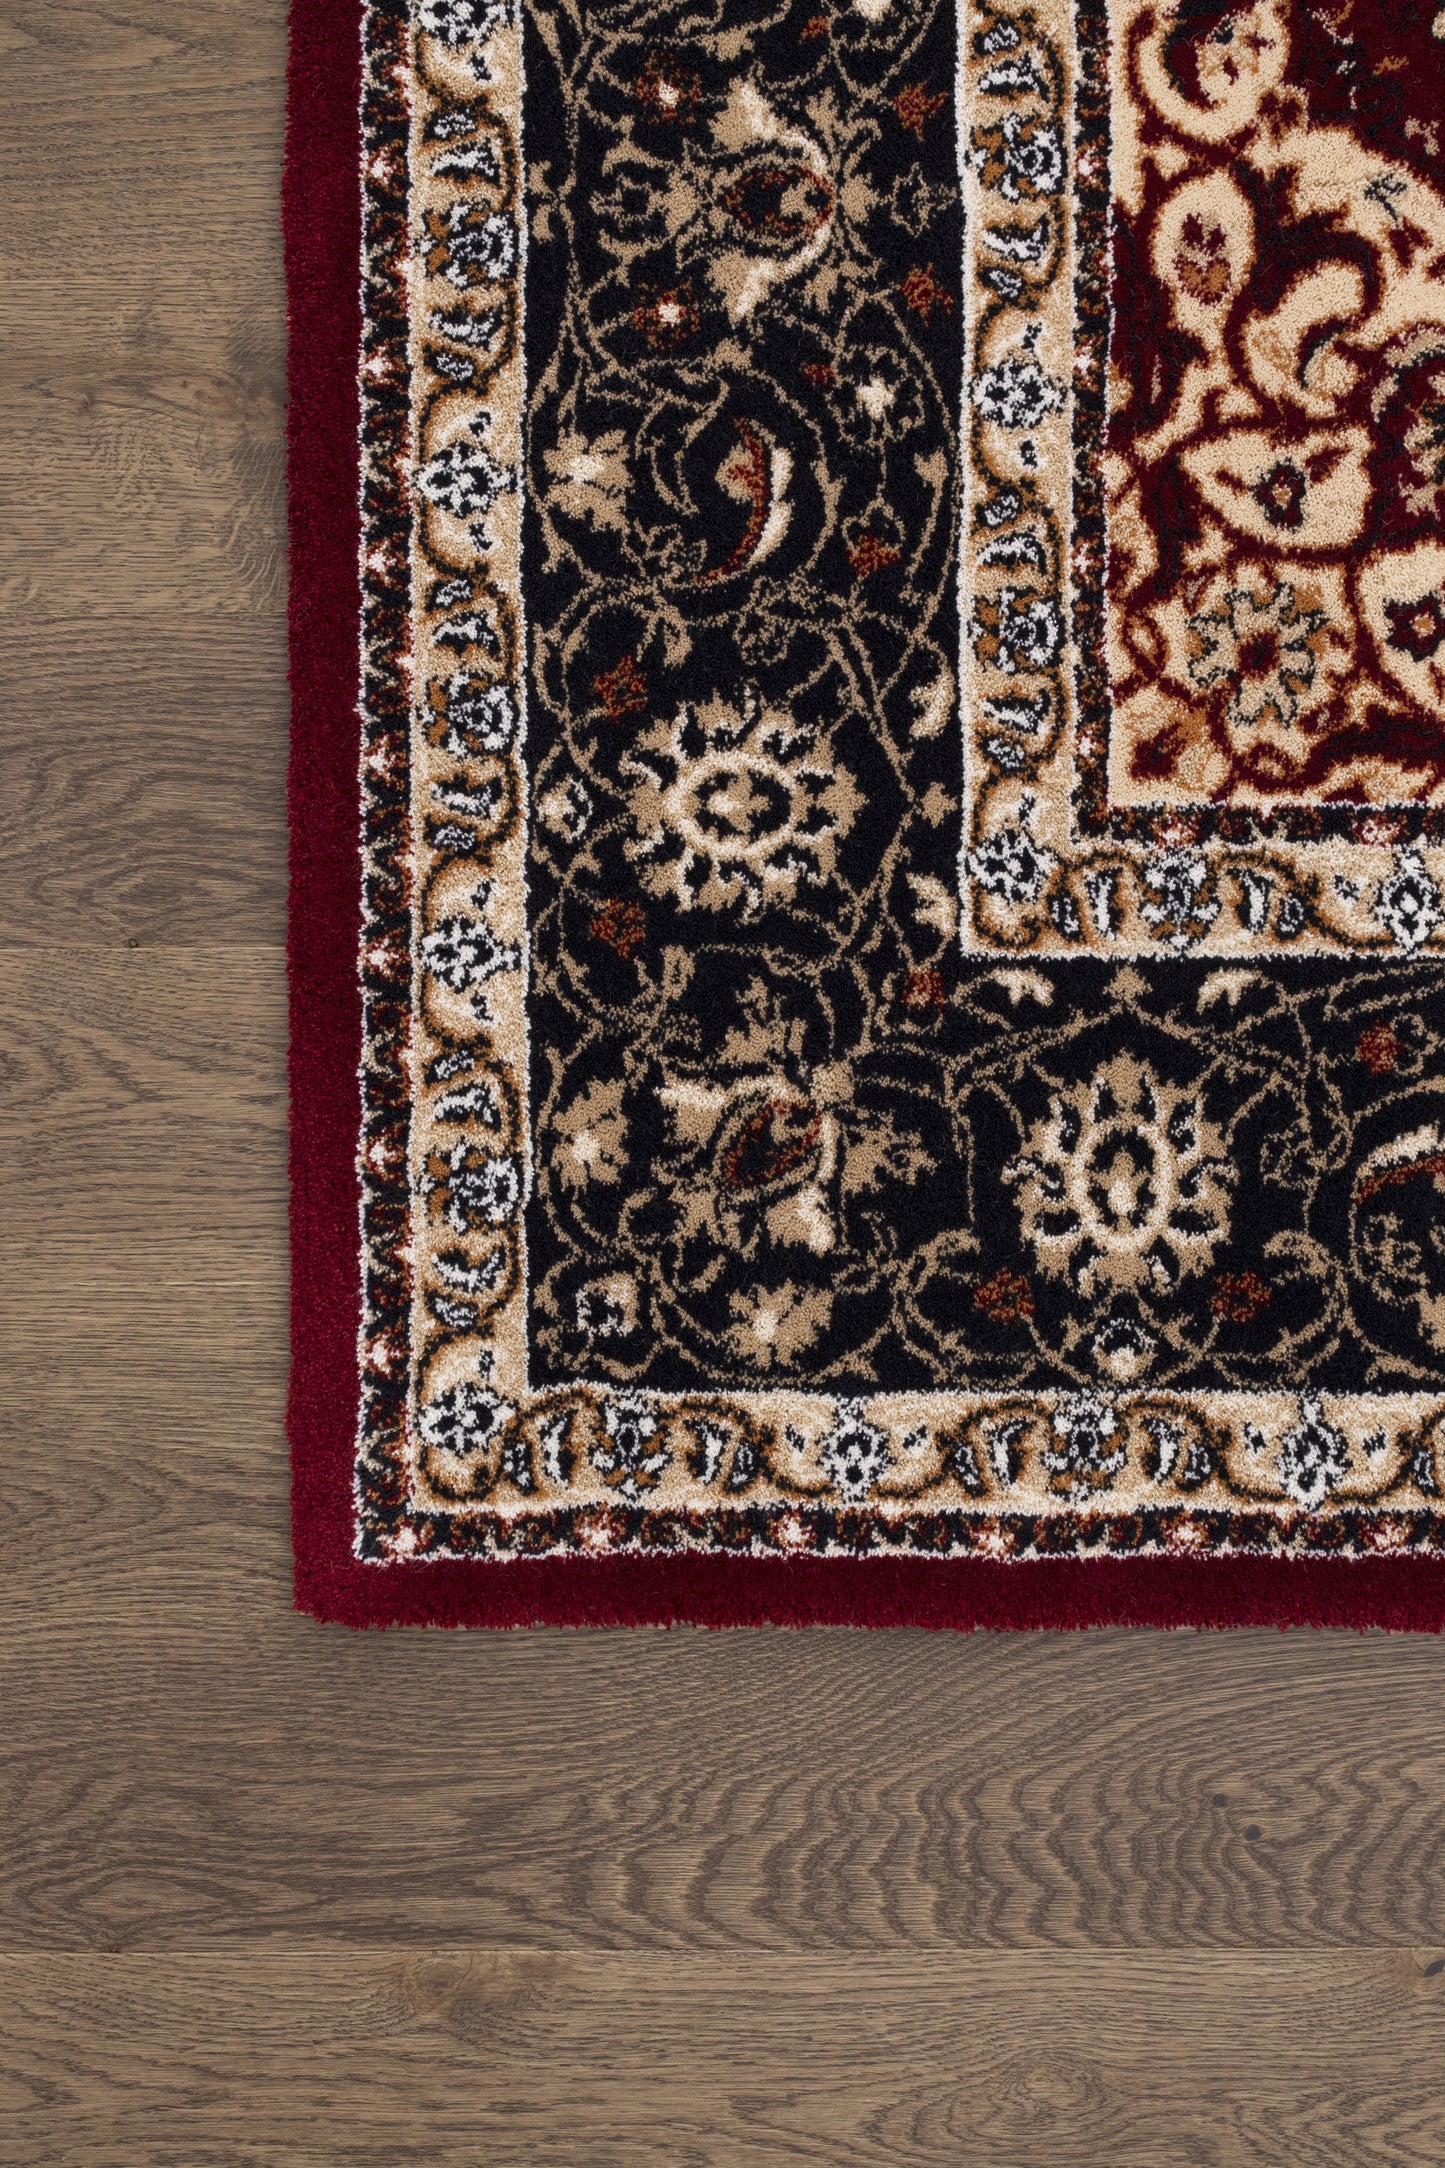 Agnella Rugs Calisia DAMORE Dark Red - 100% New Zealand Wool - Free Delivery